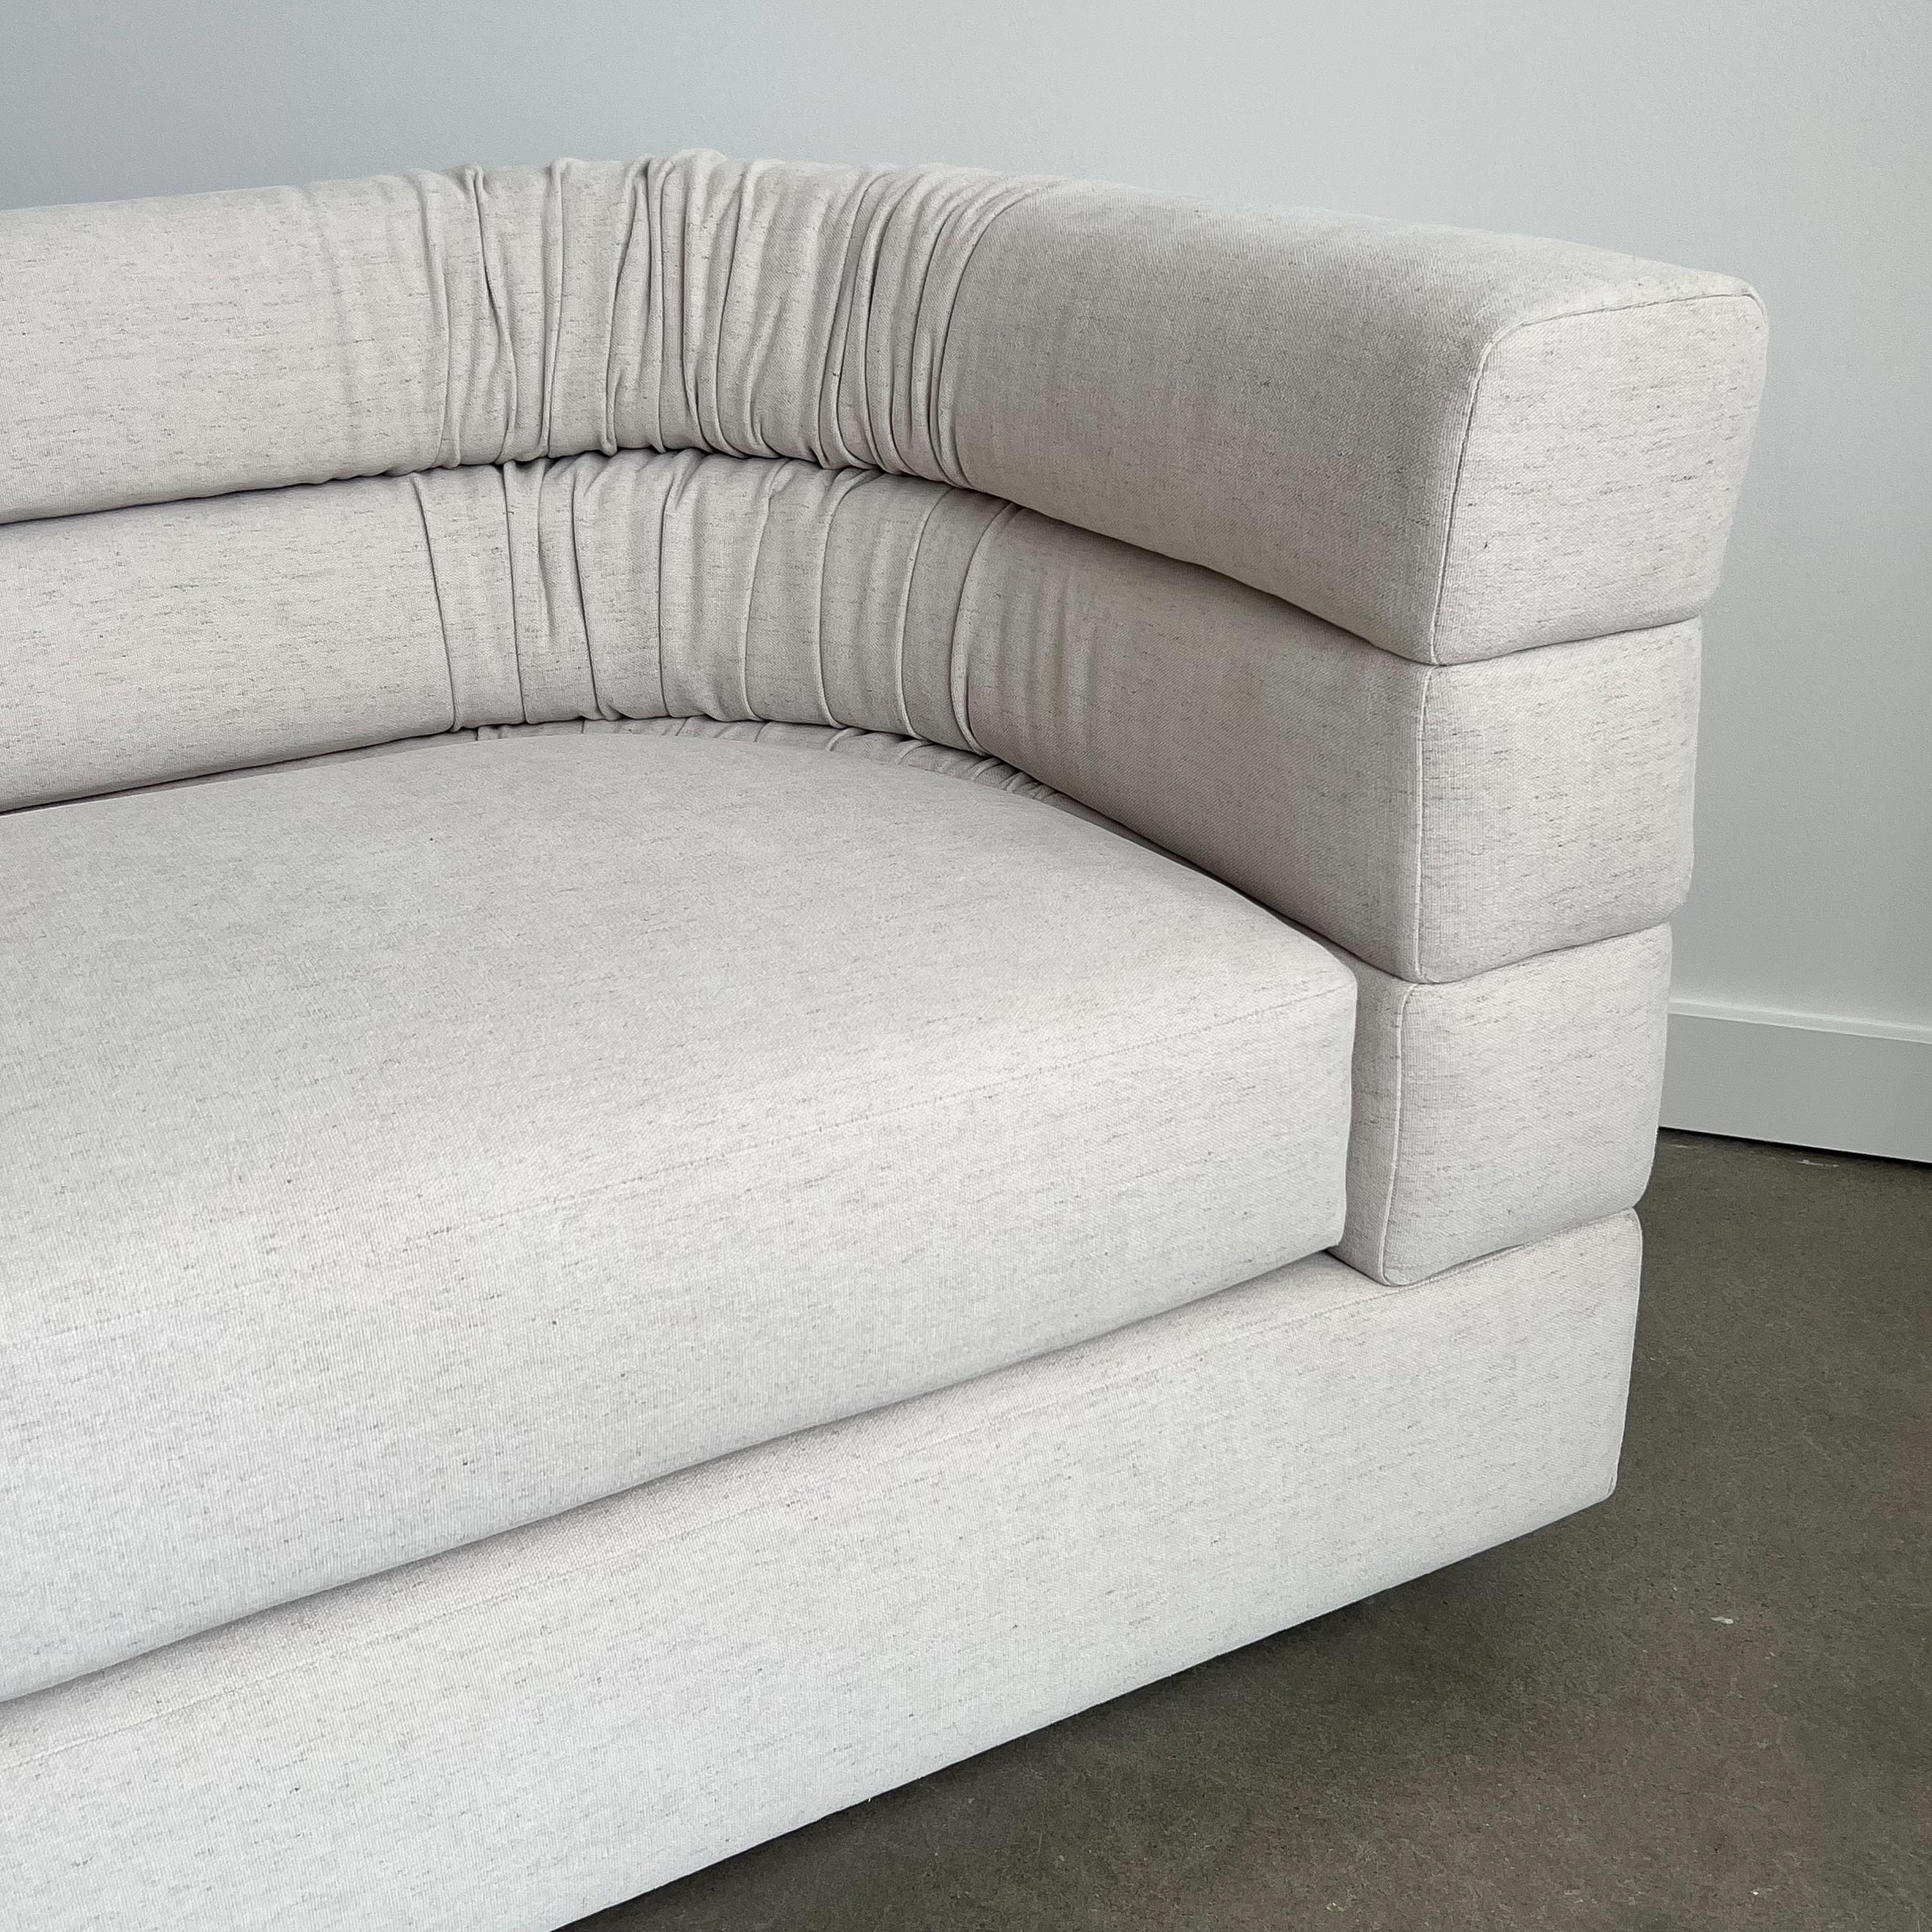 Interior Crafts Channeled Back Two Piece Sofa by Richard Himmel 8